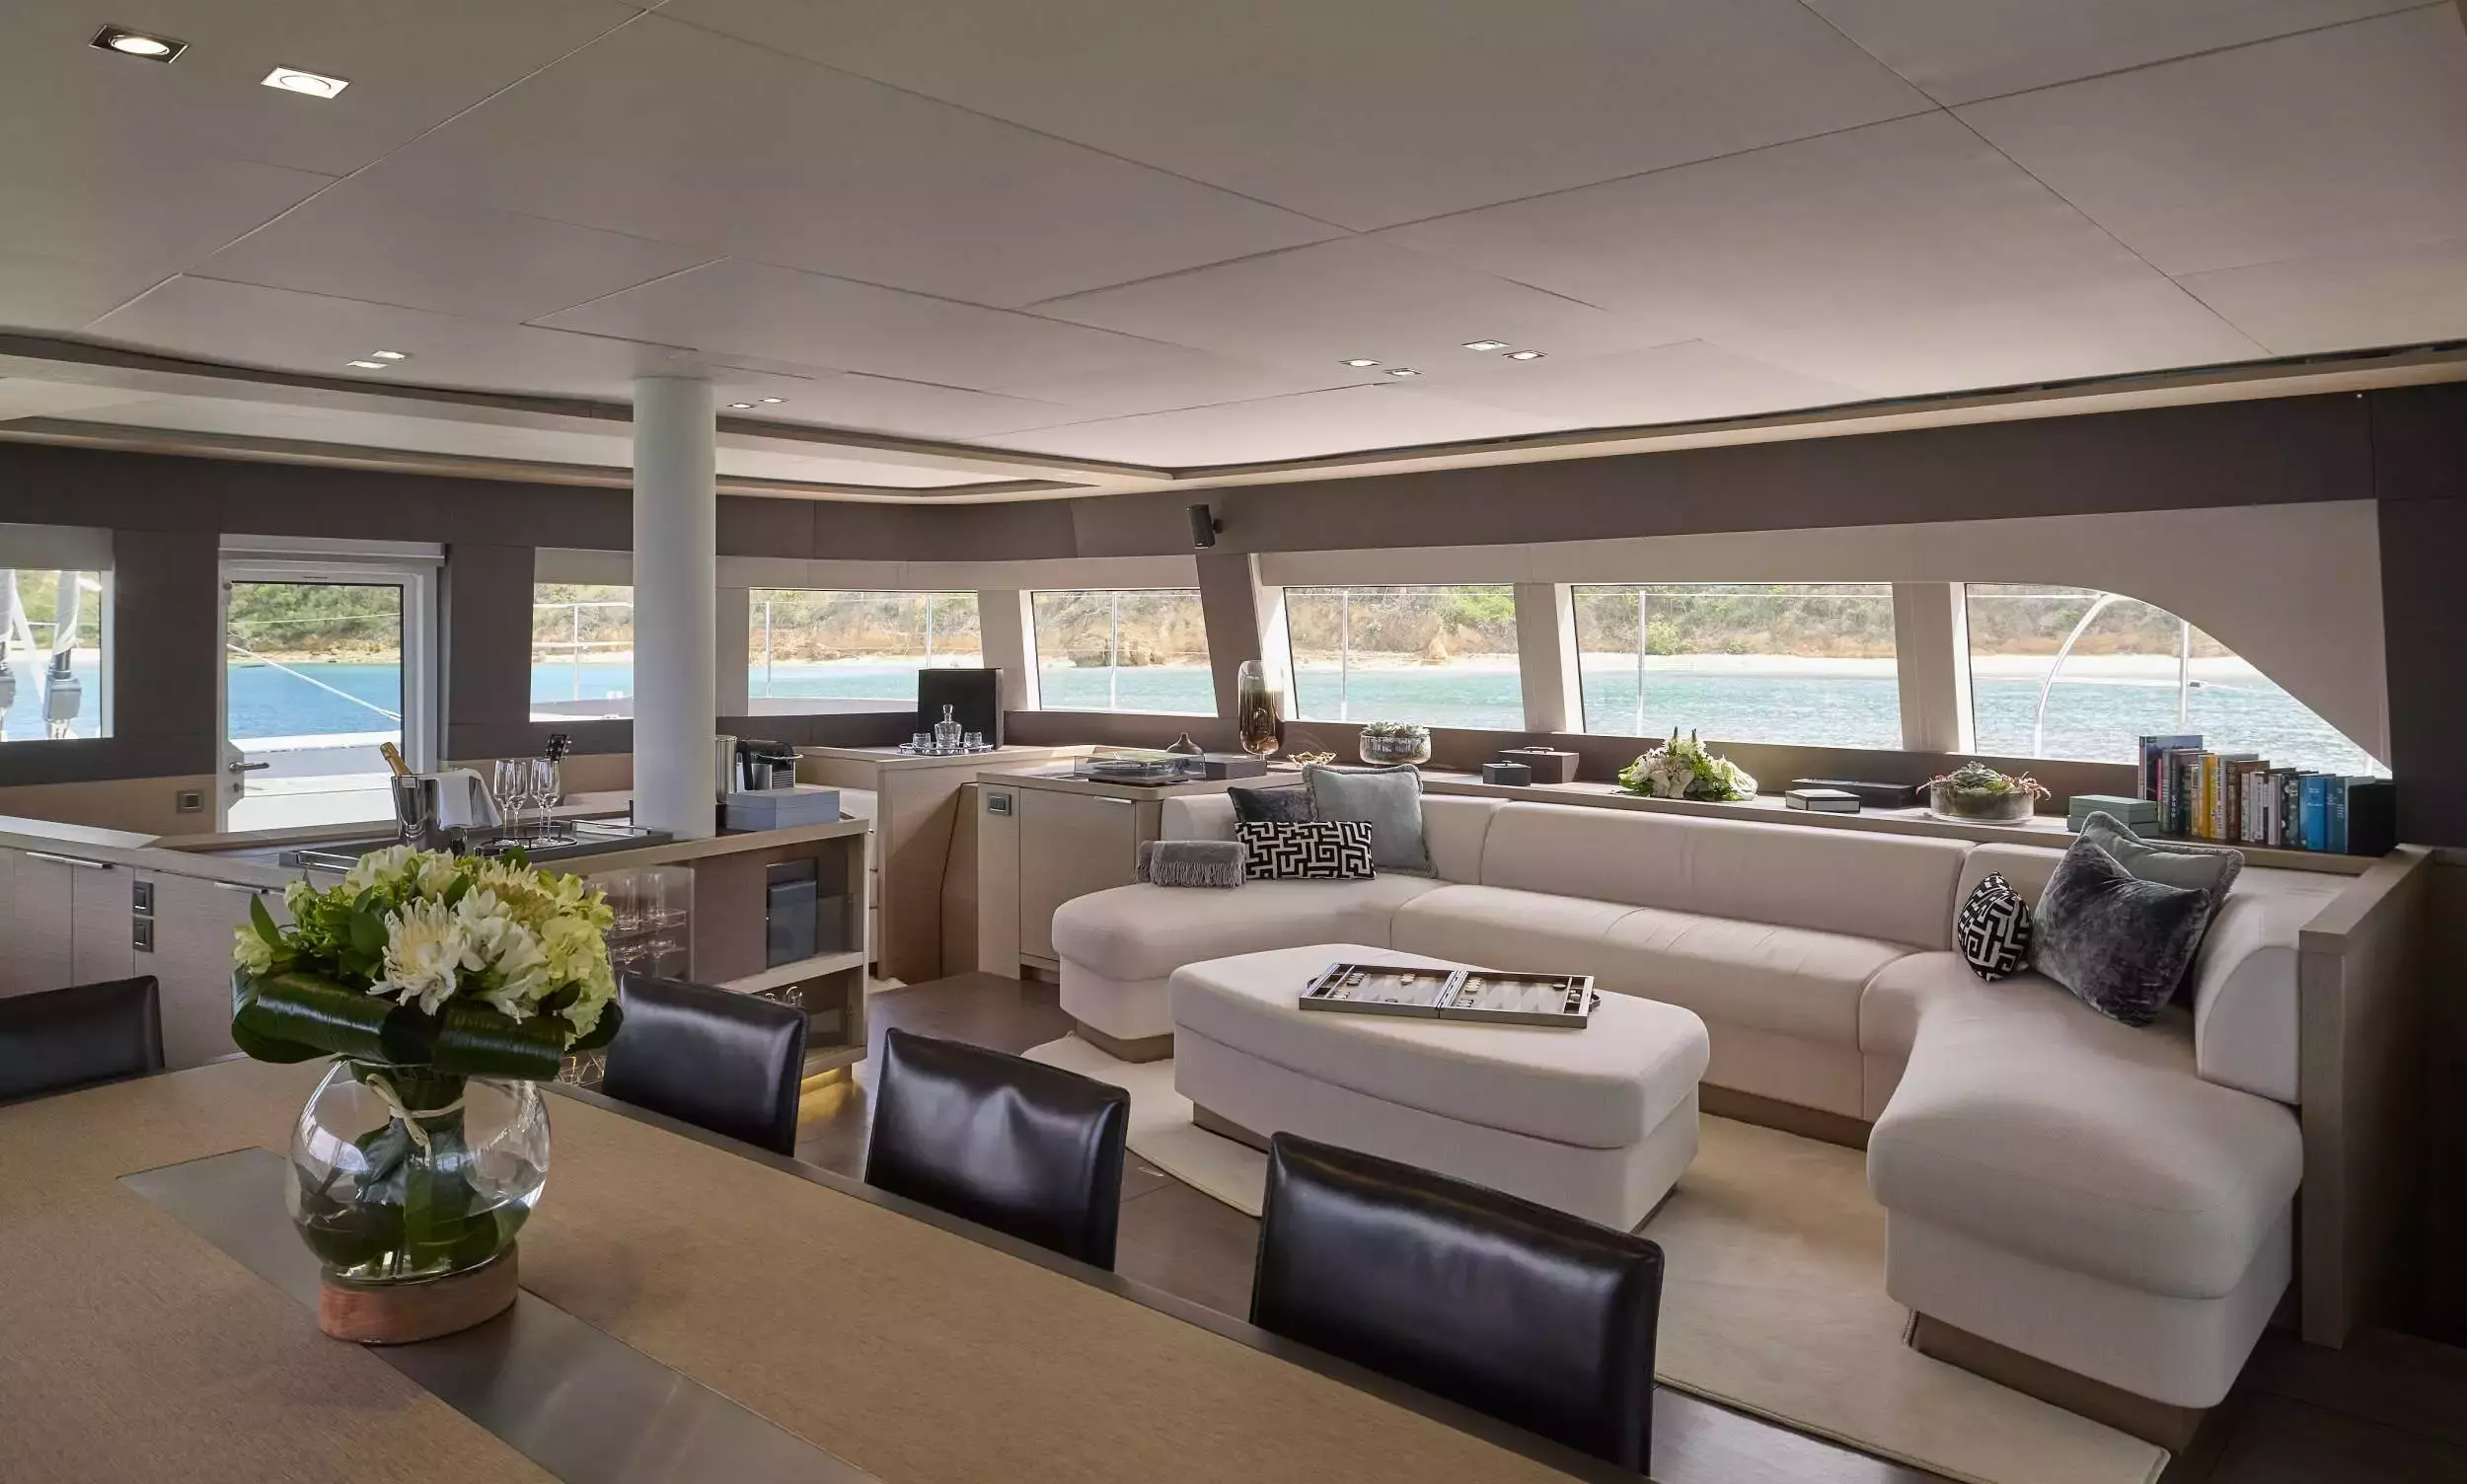 La Gatta by CNB Bordeaux - Special Offer for a private Luxury Catamaran Charter in Bequia with a crew